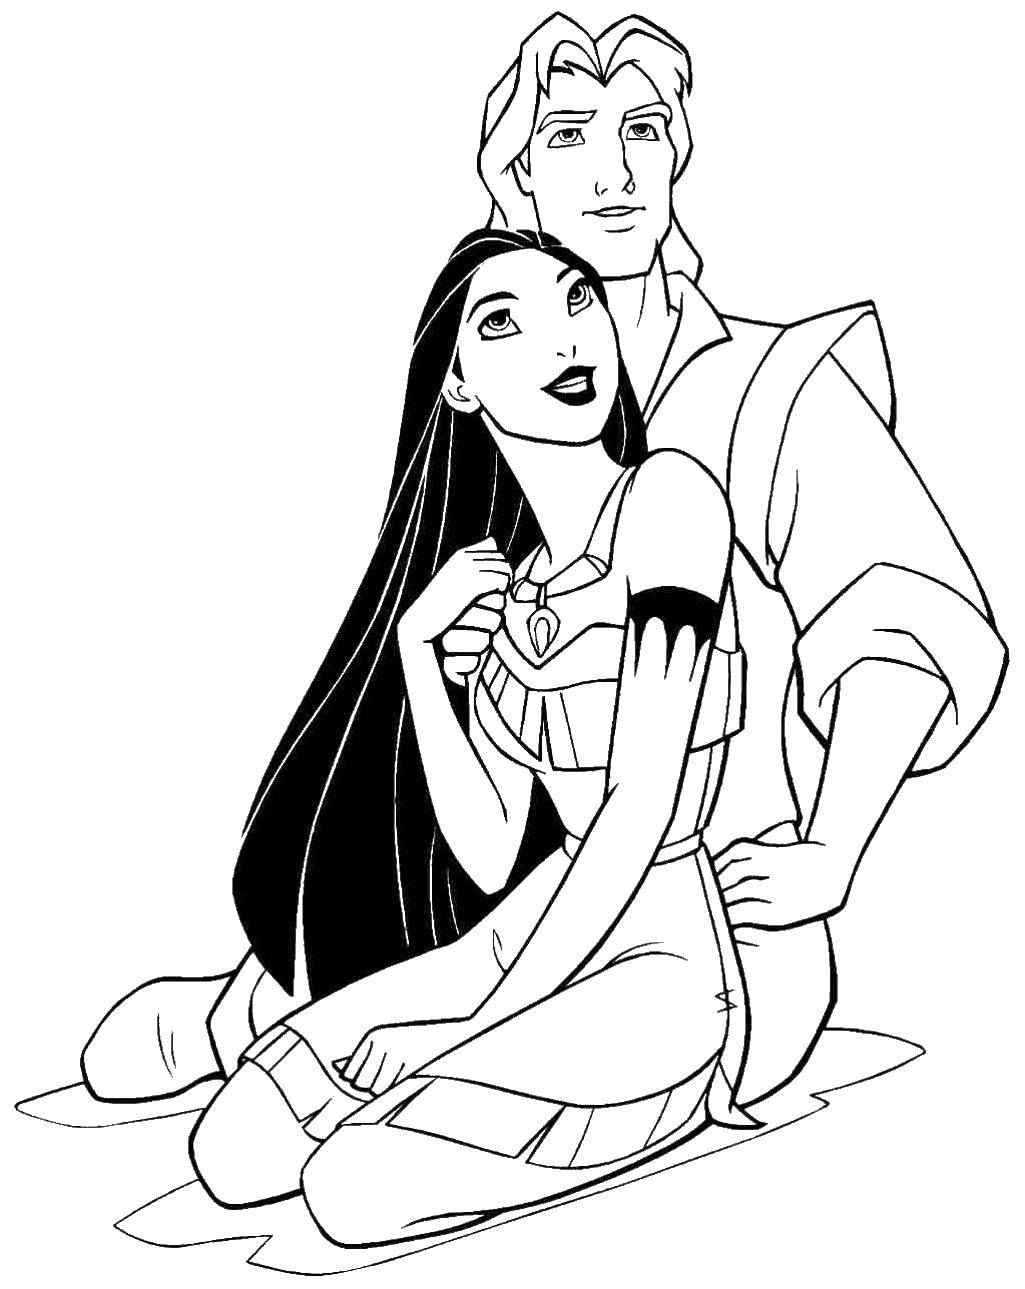 Coloring Mulan with her lover. Category Disney coloring pages. Tags:  Disney, Mulan.